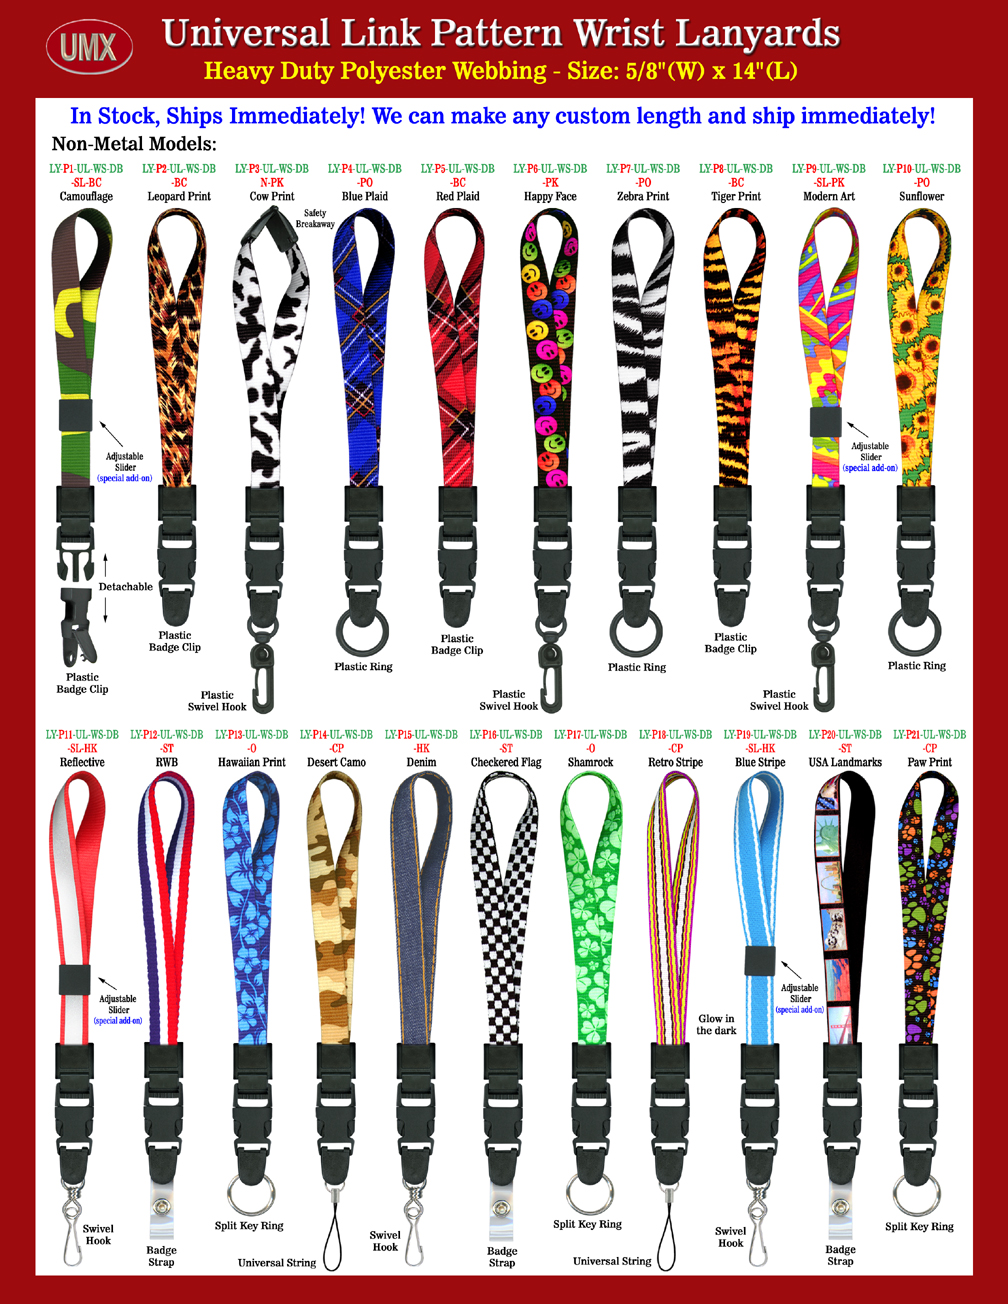 5/8" Pre-Printed Universal Link Quick Release Wrist Lanyards - Scan-Safe Wrist Lanyards With More Than 20 Themes In Stock.